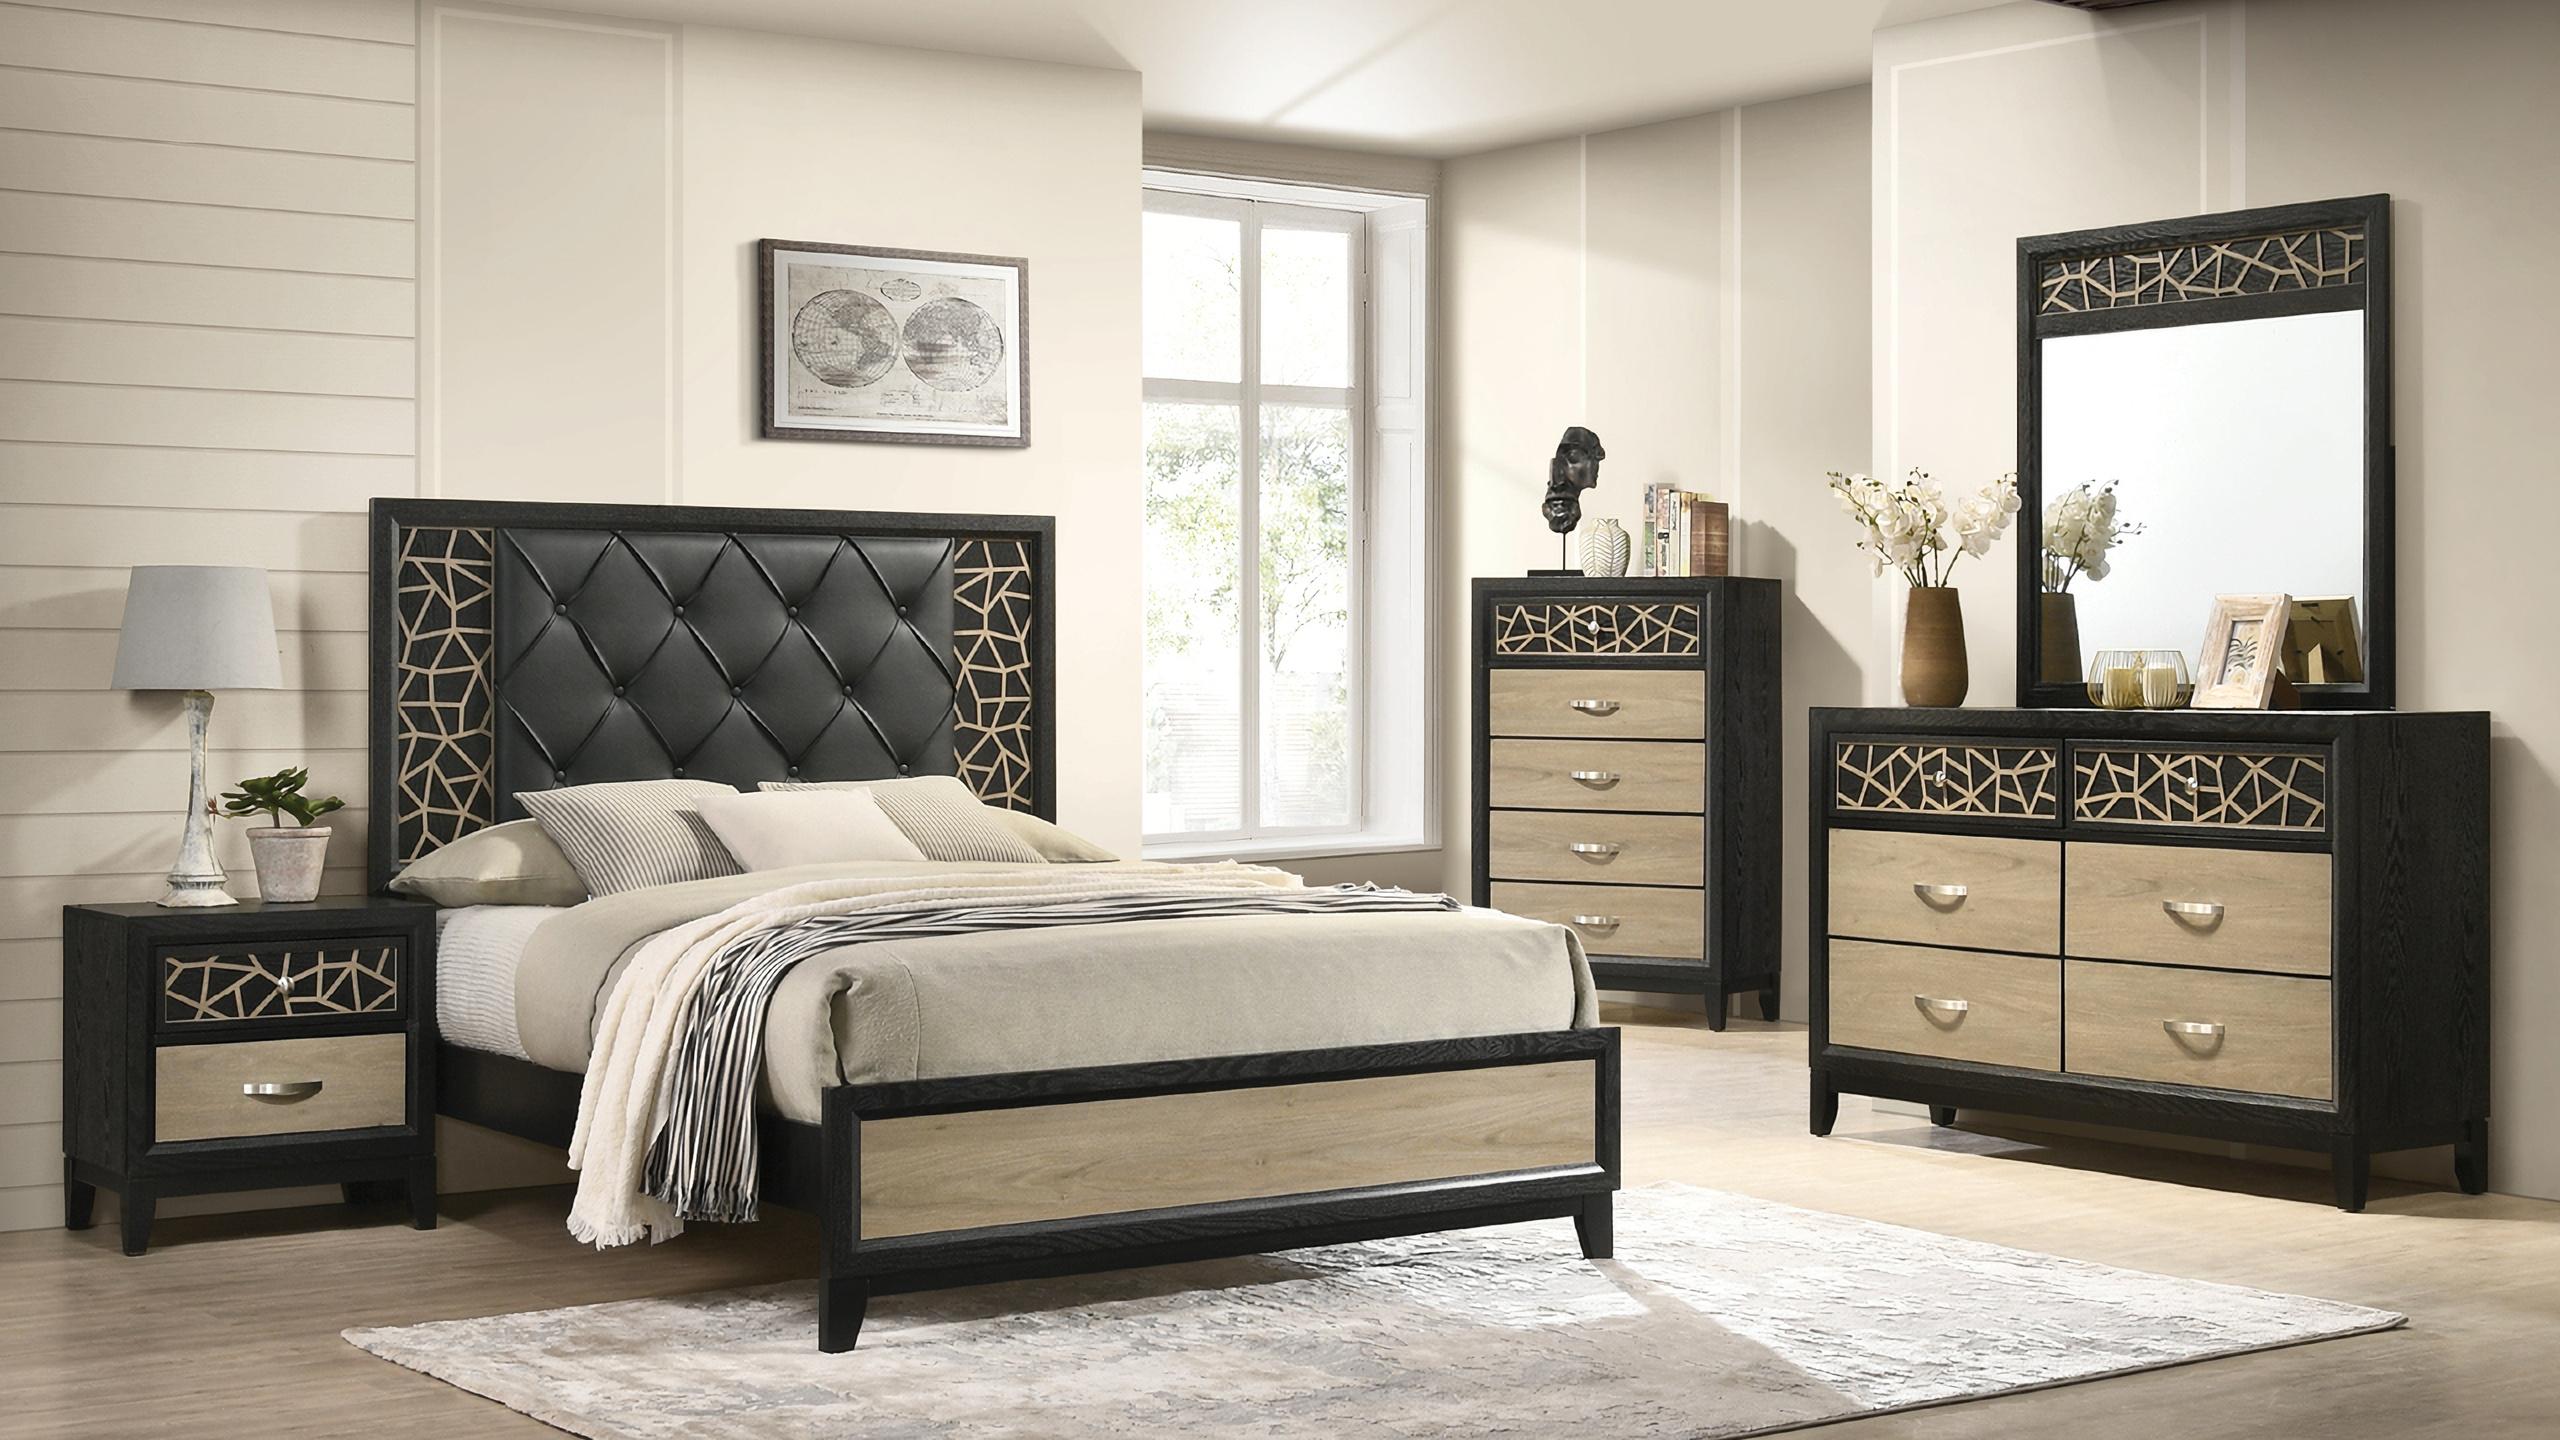 

    
Upholstered Queen Bed Set 5Pcs with Wooden Pattern In Black Selena Galaxy Home Contemporary
